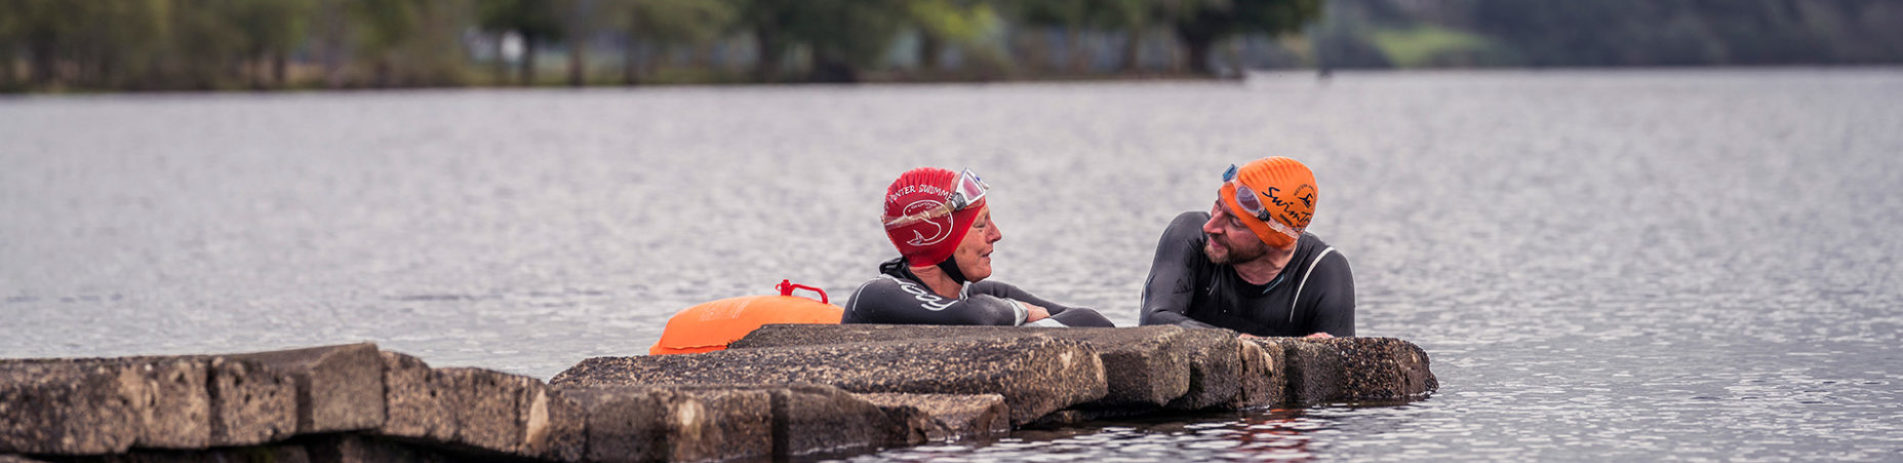 couple-wearing-wet-suits-resting-on-pier-in-the-loch